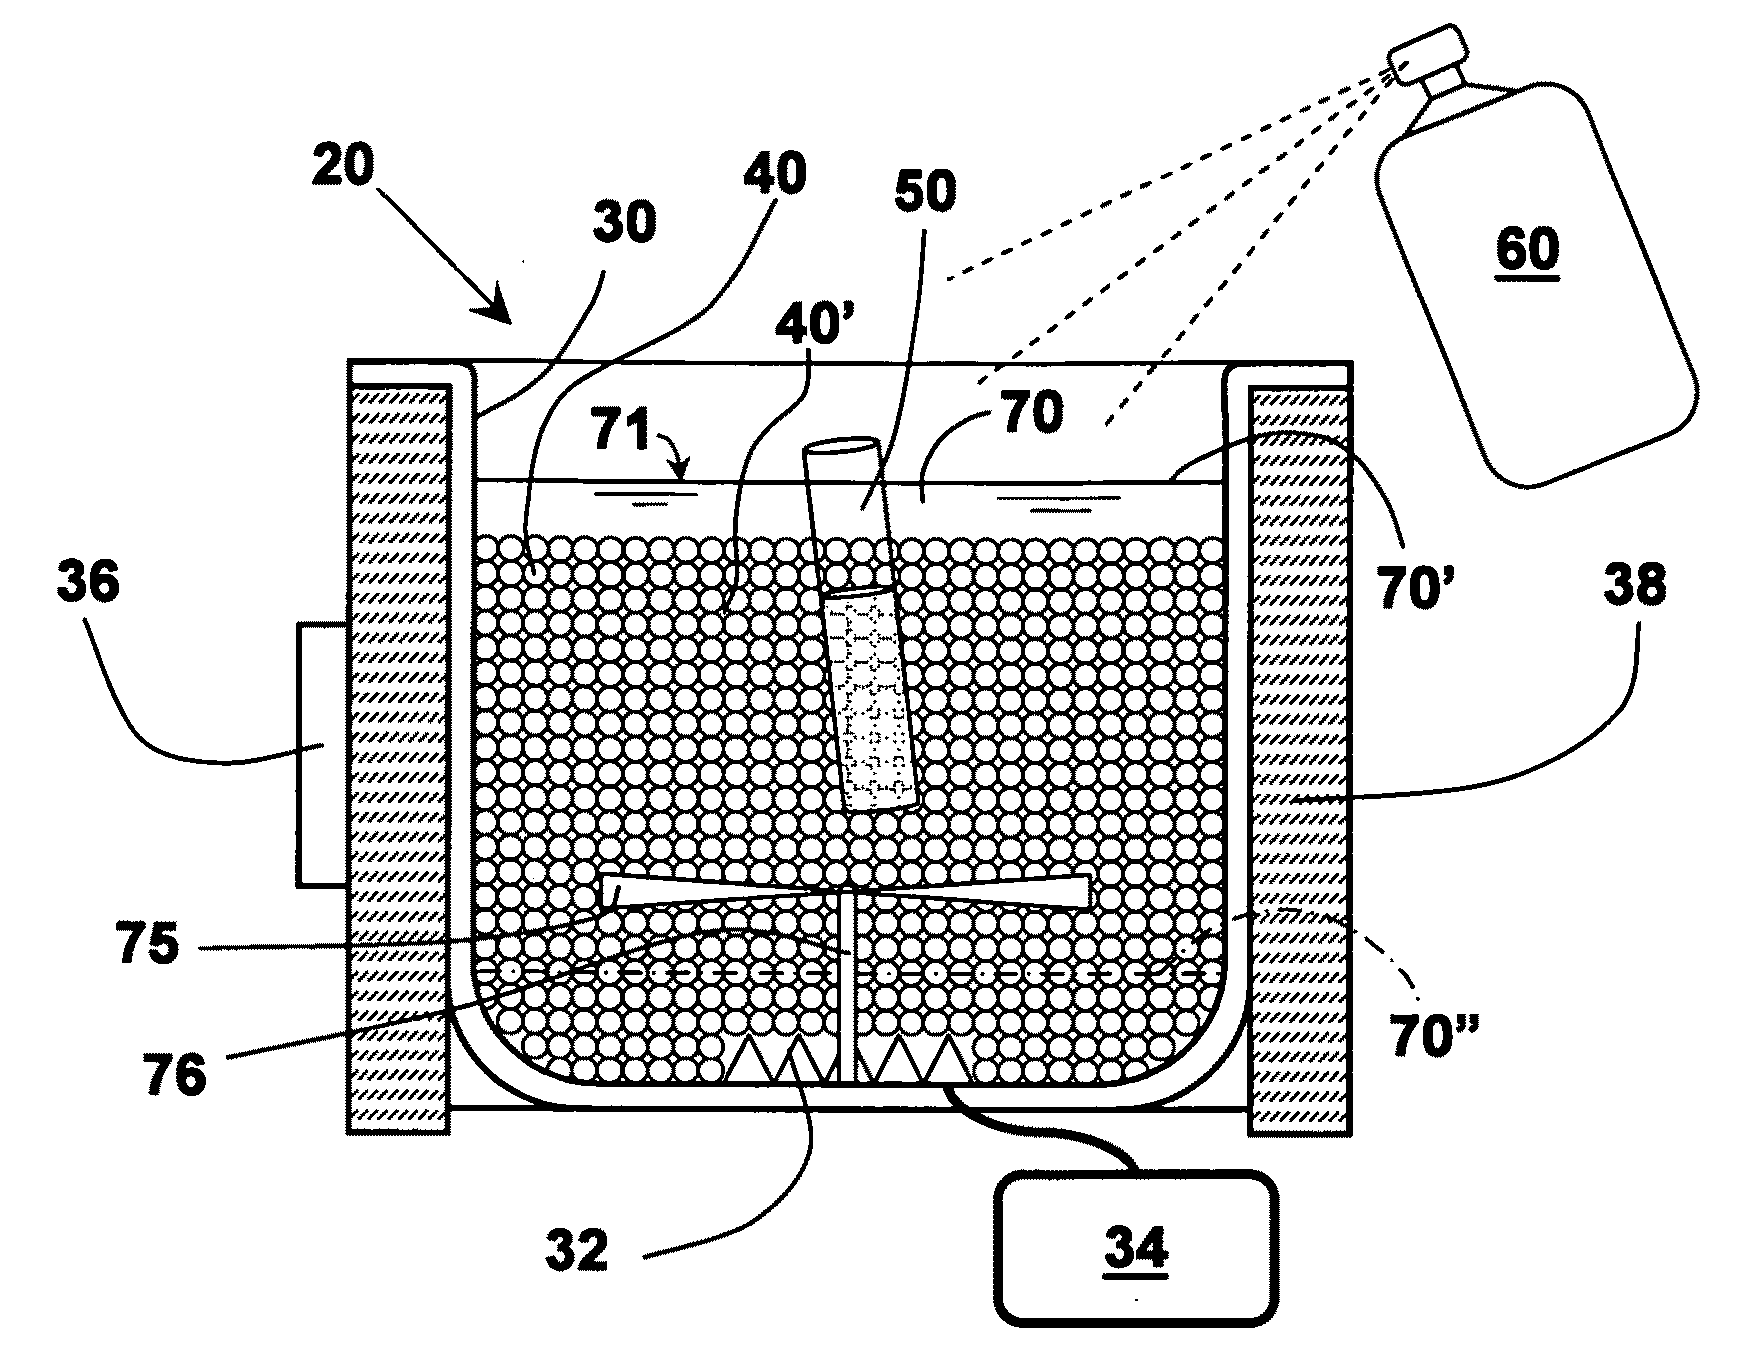 Thermal bath systems and thermally-conductive particulate thermal bath media and methods